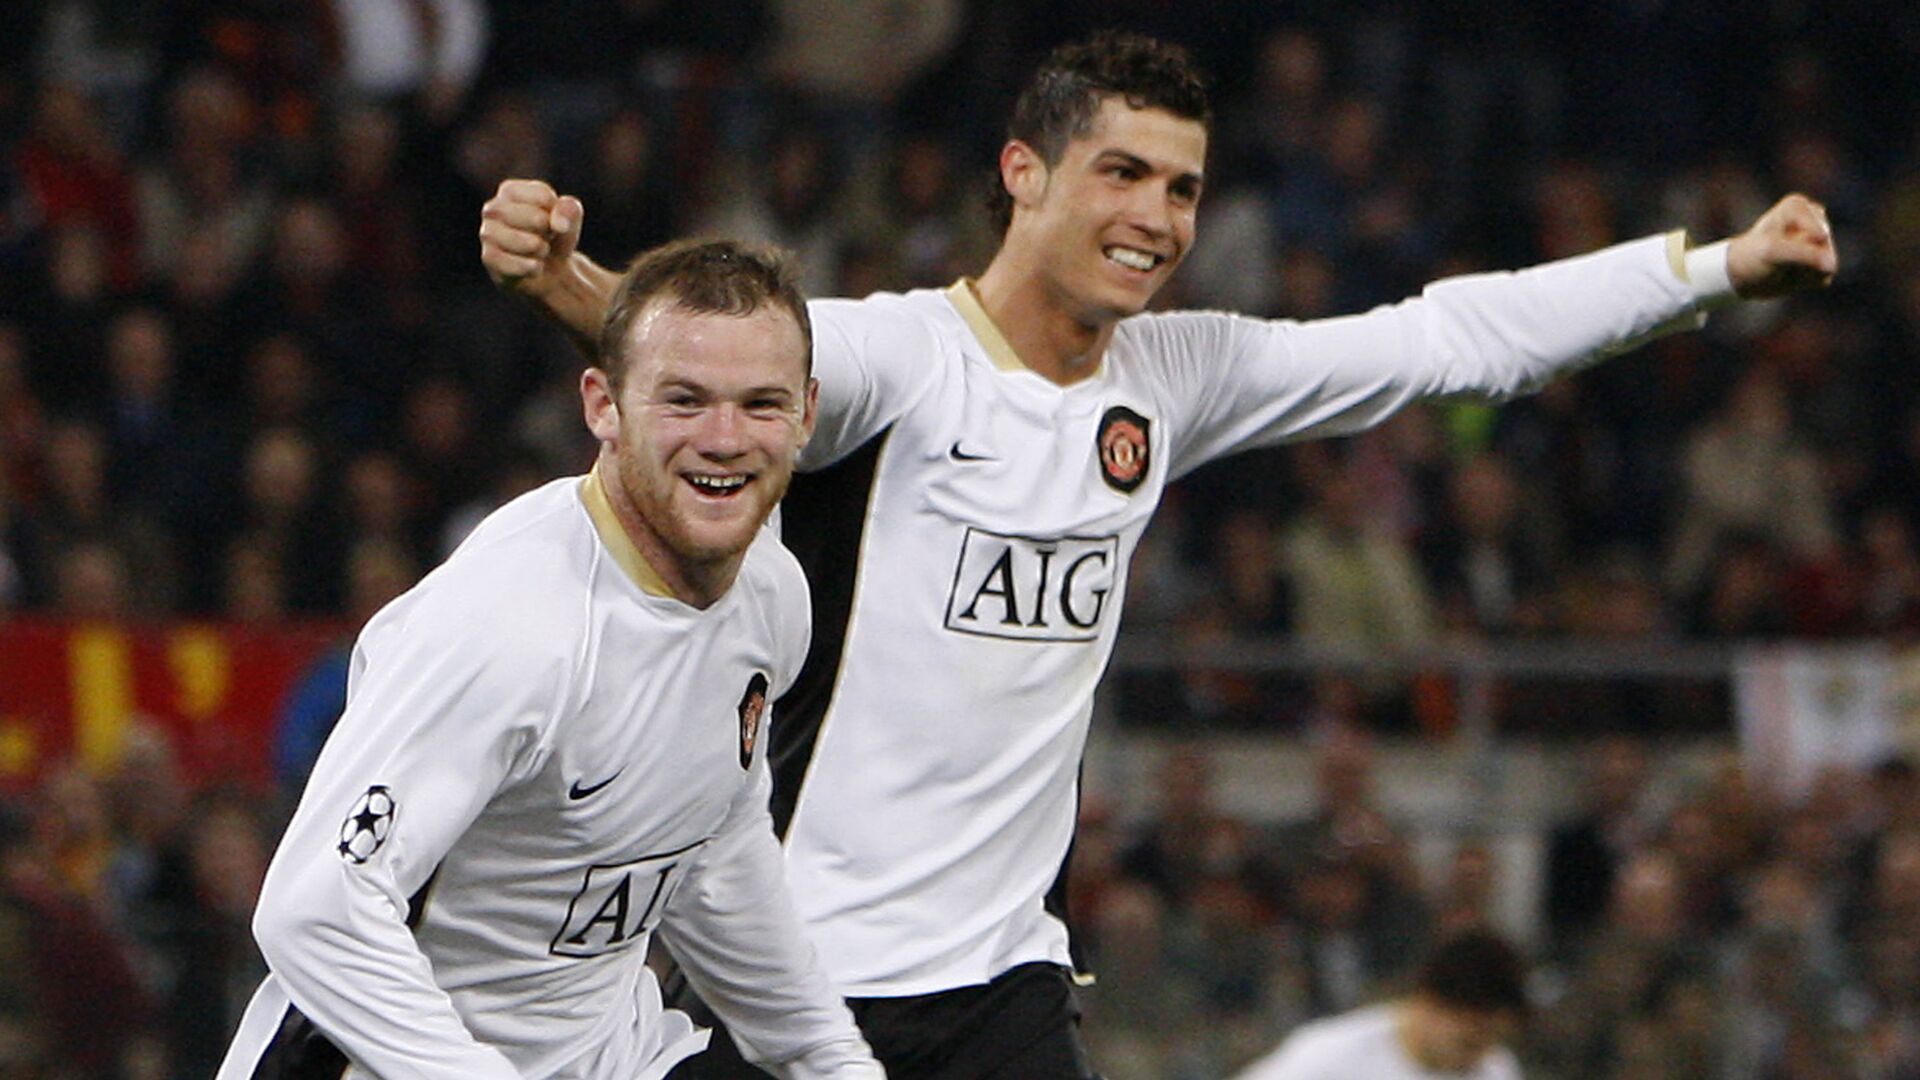 Manchester United's Wayne Rooney, left, celebrates after scoring  against AS Roma with teammate Cristiano Ronaldo, during their Champion's League quarterfinal, first-leg soccer match at the Rome Olympic stadium, Rome, Italy, Tuesday April 1, 2008. Manchester United won 2-0 with the first goal scored by Ronaldo and the second one by Rooney. - اسپوتنیک افغانستان  , 1920, 08.04.2022